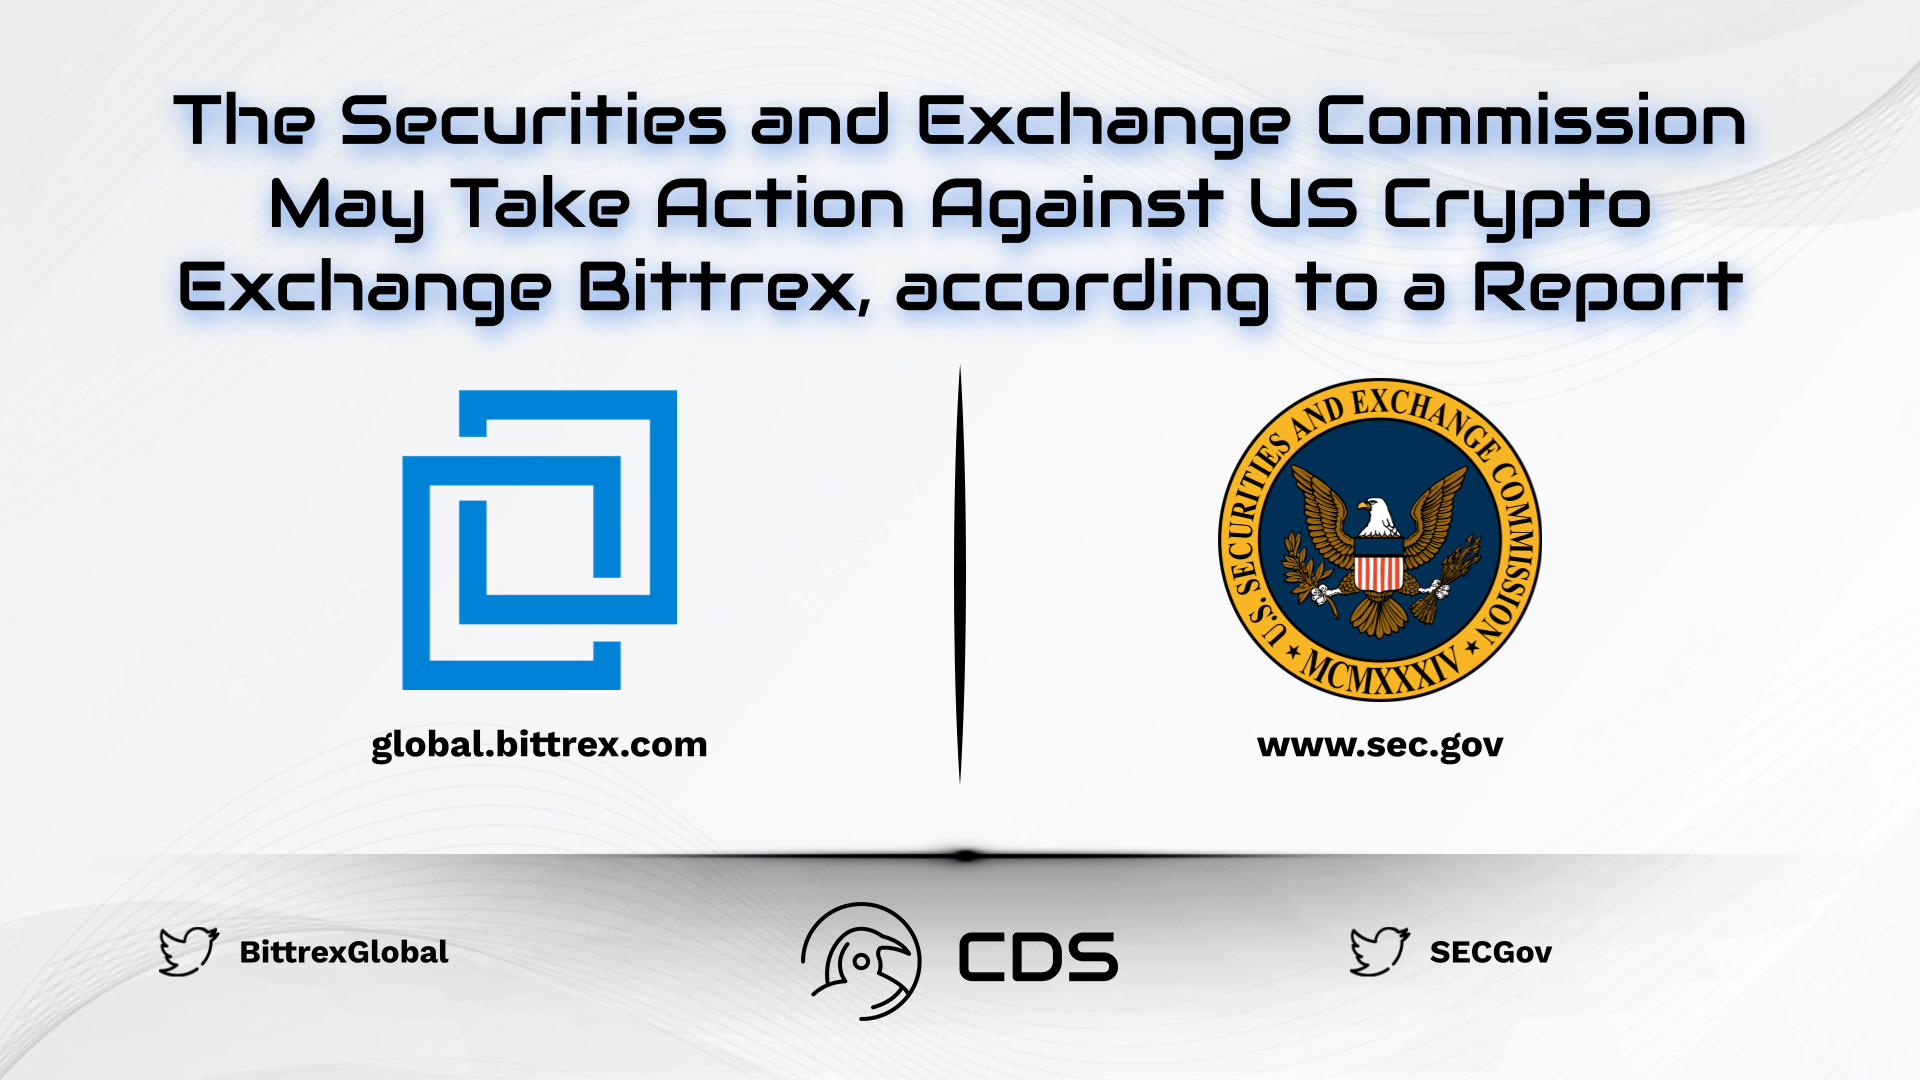 The Securities and Exchange Commission May Take Action Against US Crypto Exchange Bittrex, according to a Report